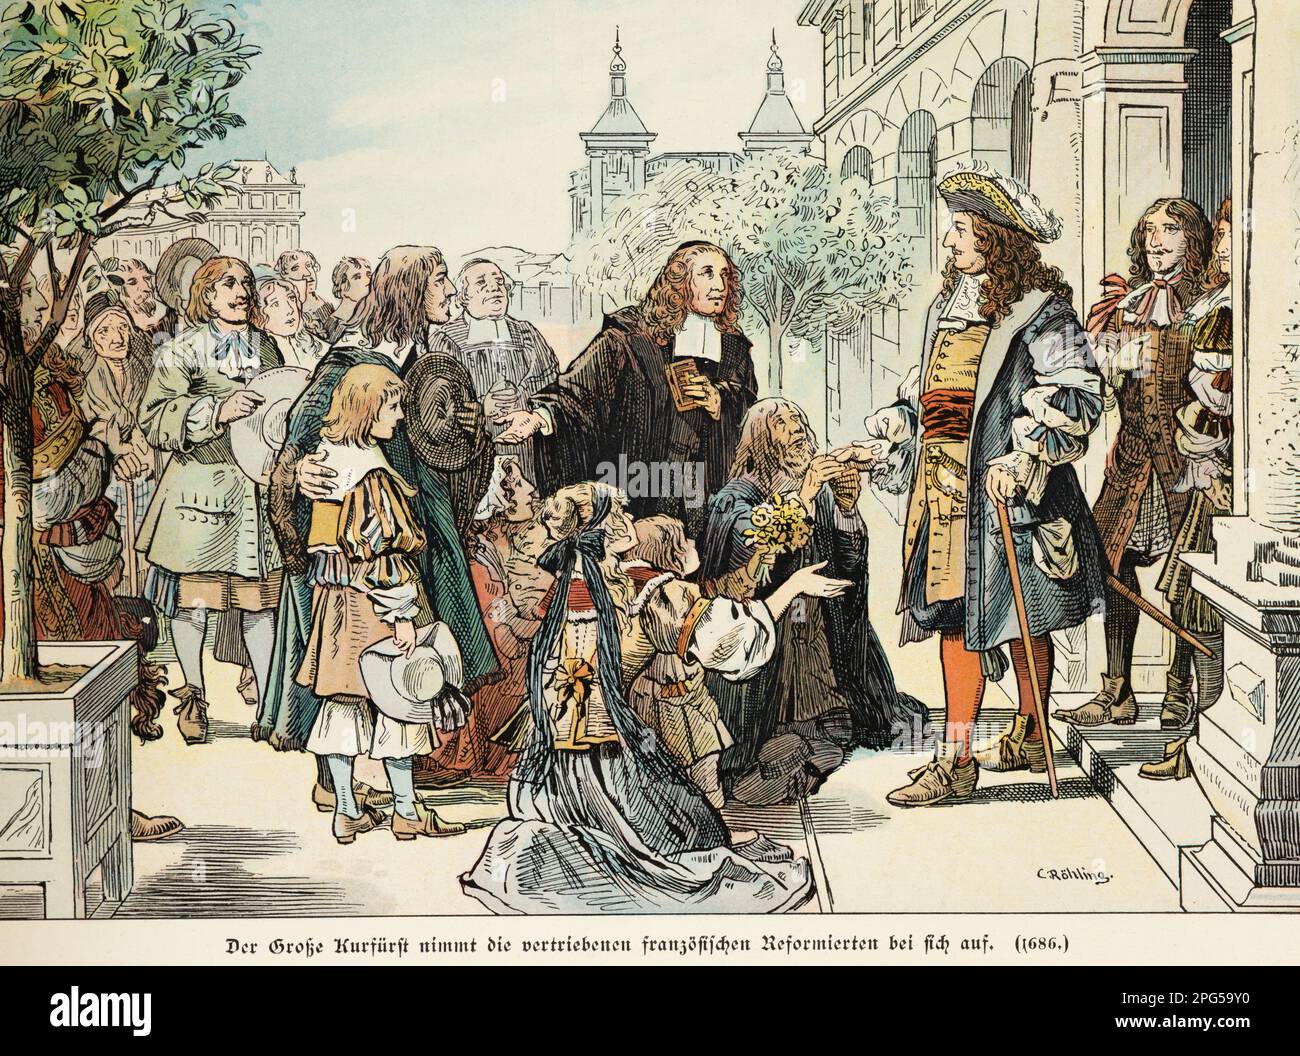 In 1686 Prince Friedrich Wilhelm the Great welcomes French reformists in his state, history of the Hohenzollern, Prussia,historical illustration 1899 Stock Photo